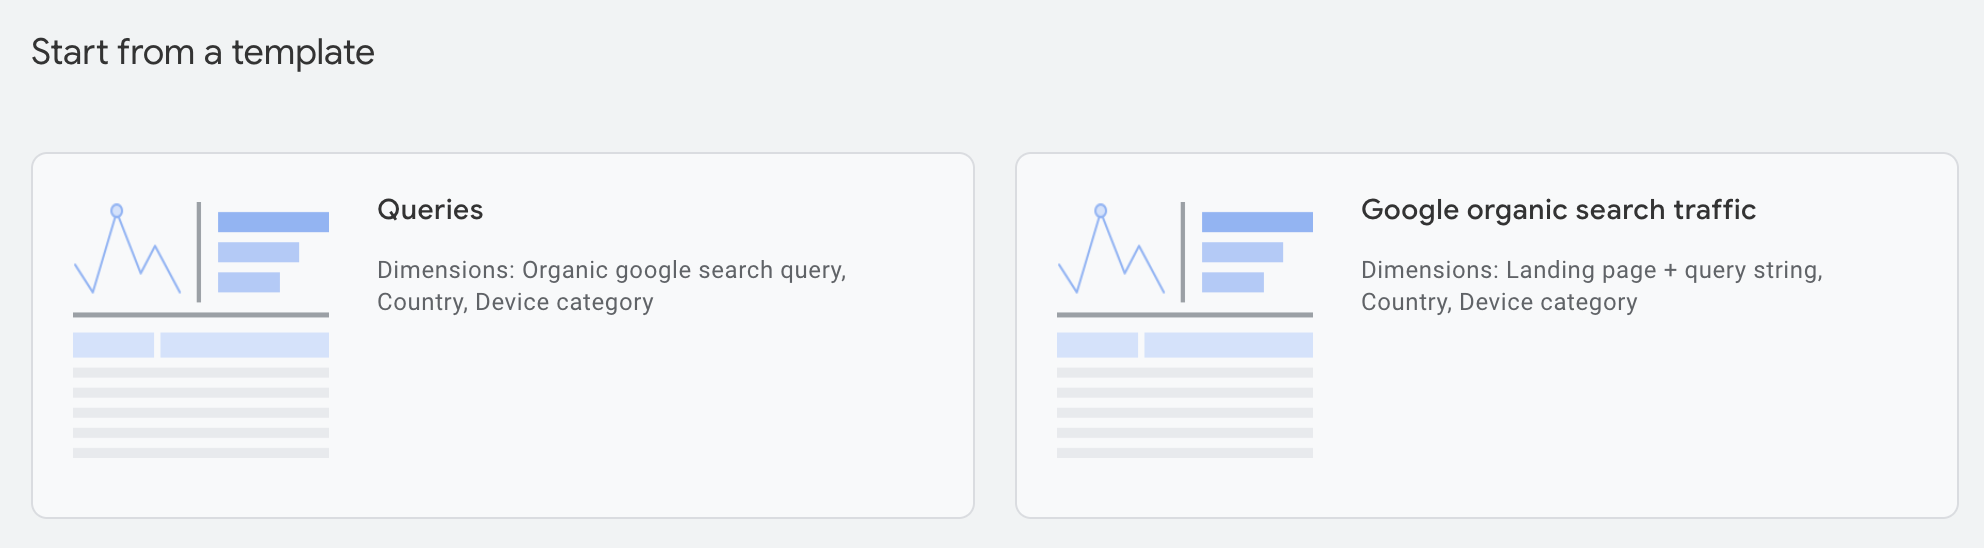 Choose the Search Console Template